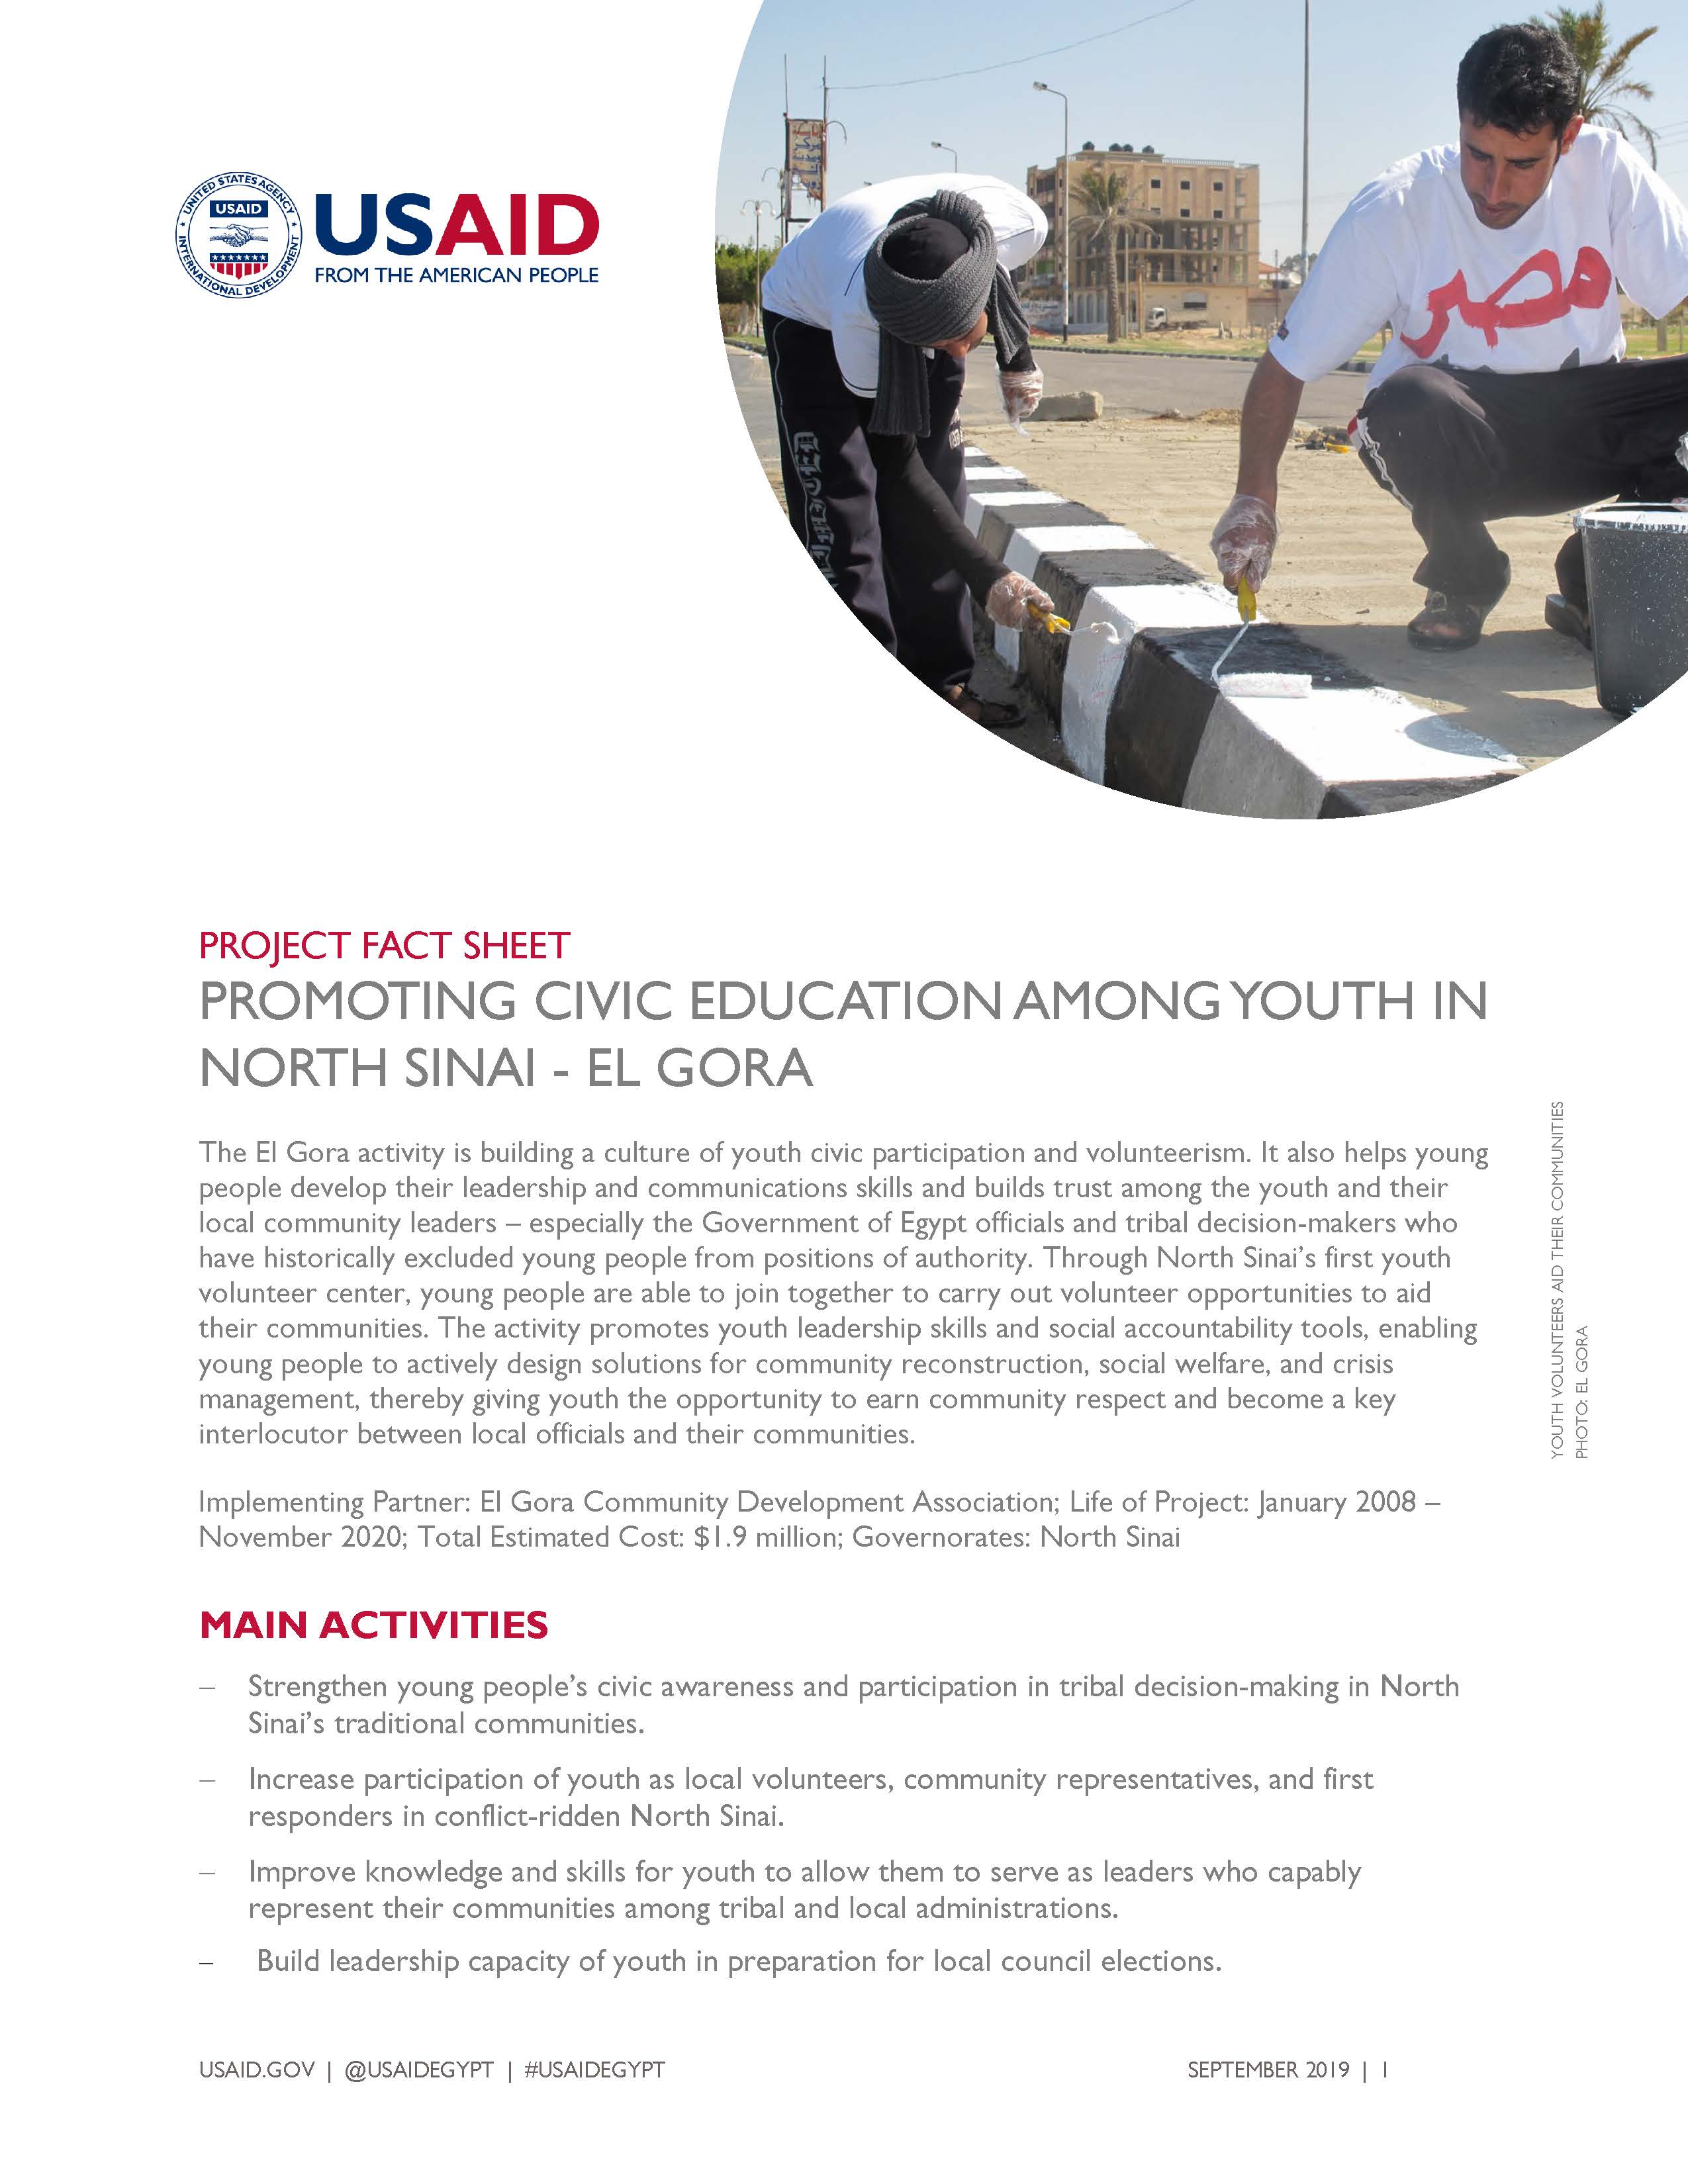 USAID/Egypt Activity Fact Sheet: Promoting Civic Education Among Youth in North Sinai - El Gora